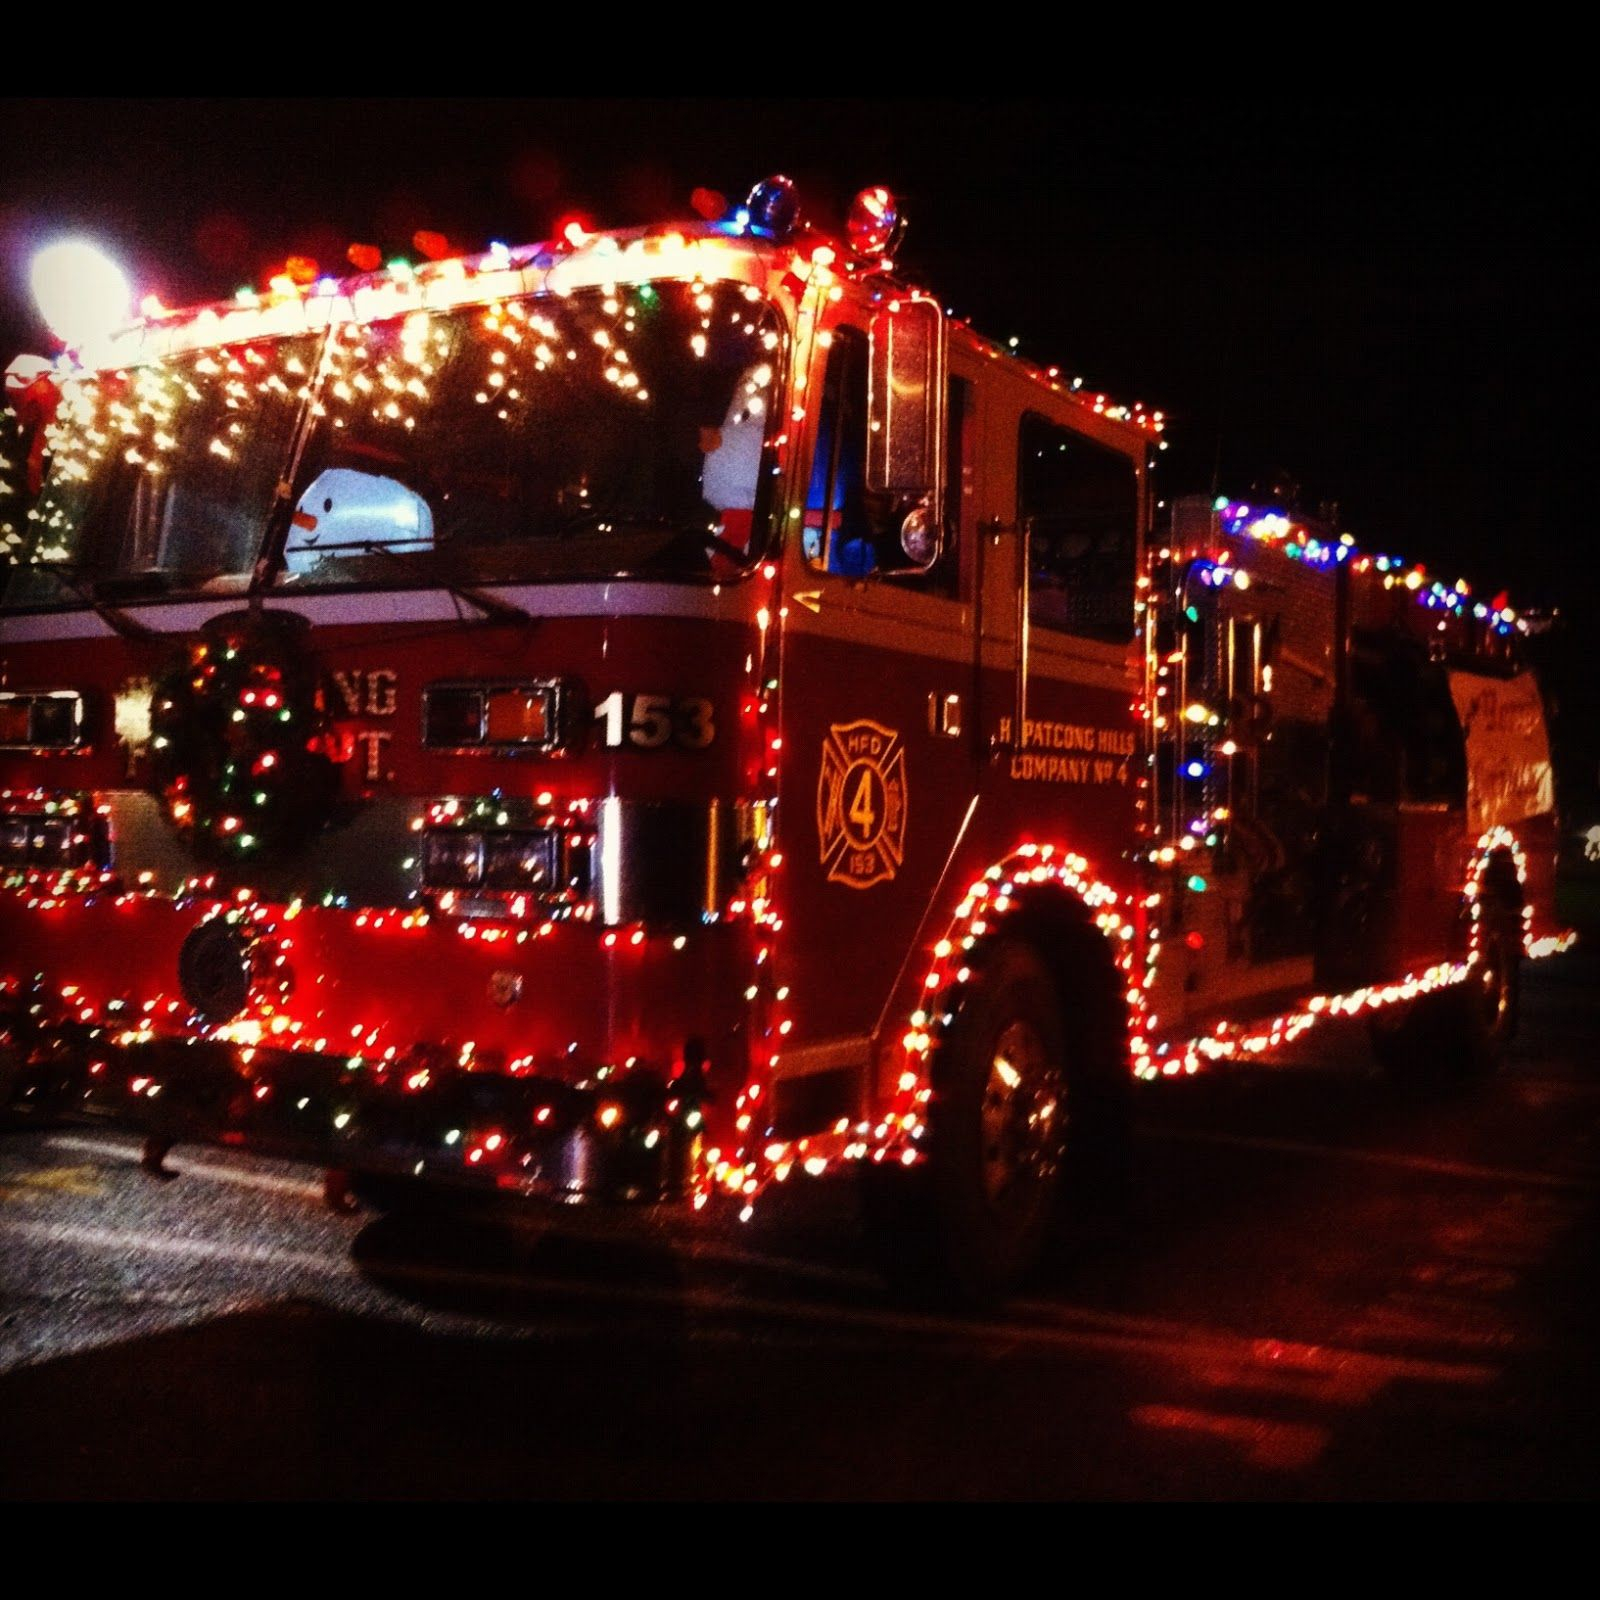 Christmas Lights Firetruck The Town Decorated The Fire Truck With within dimensions 1600 X 1600